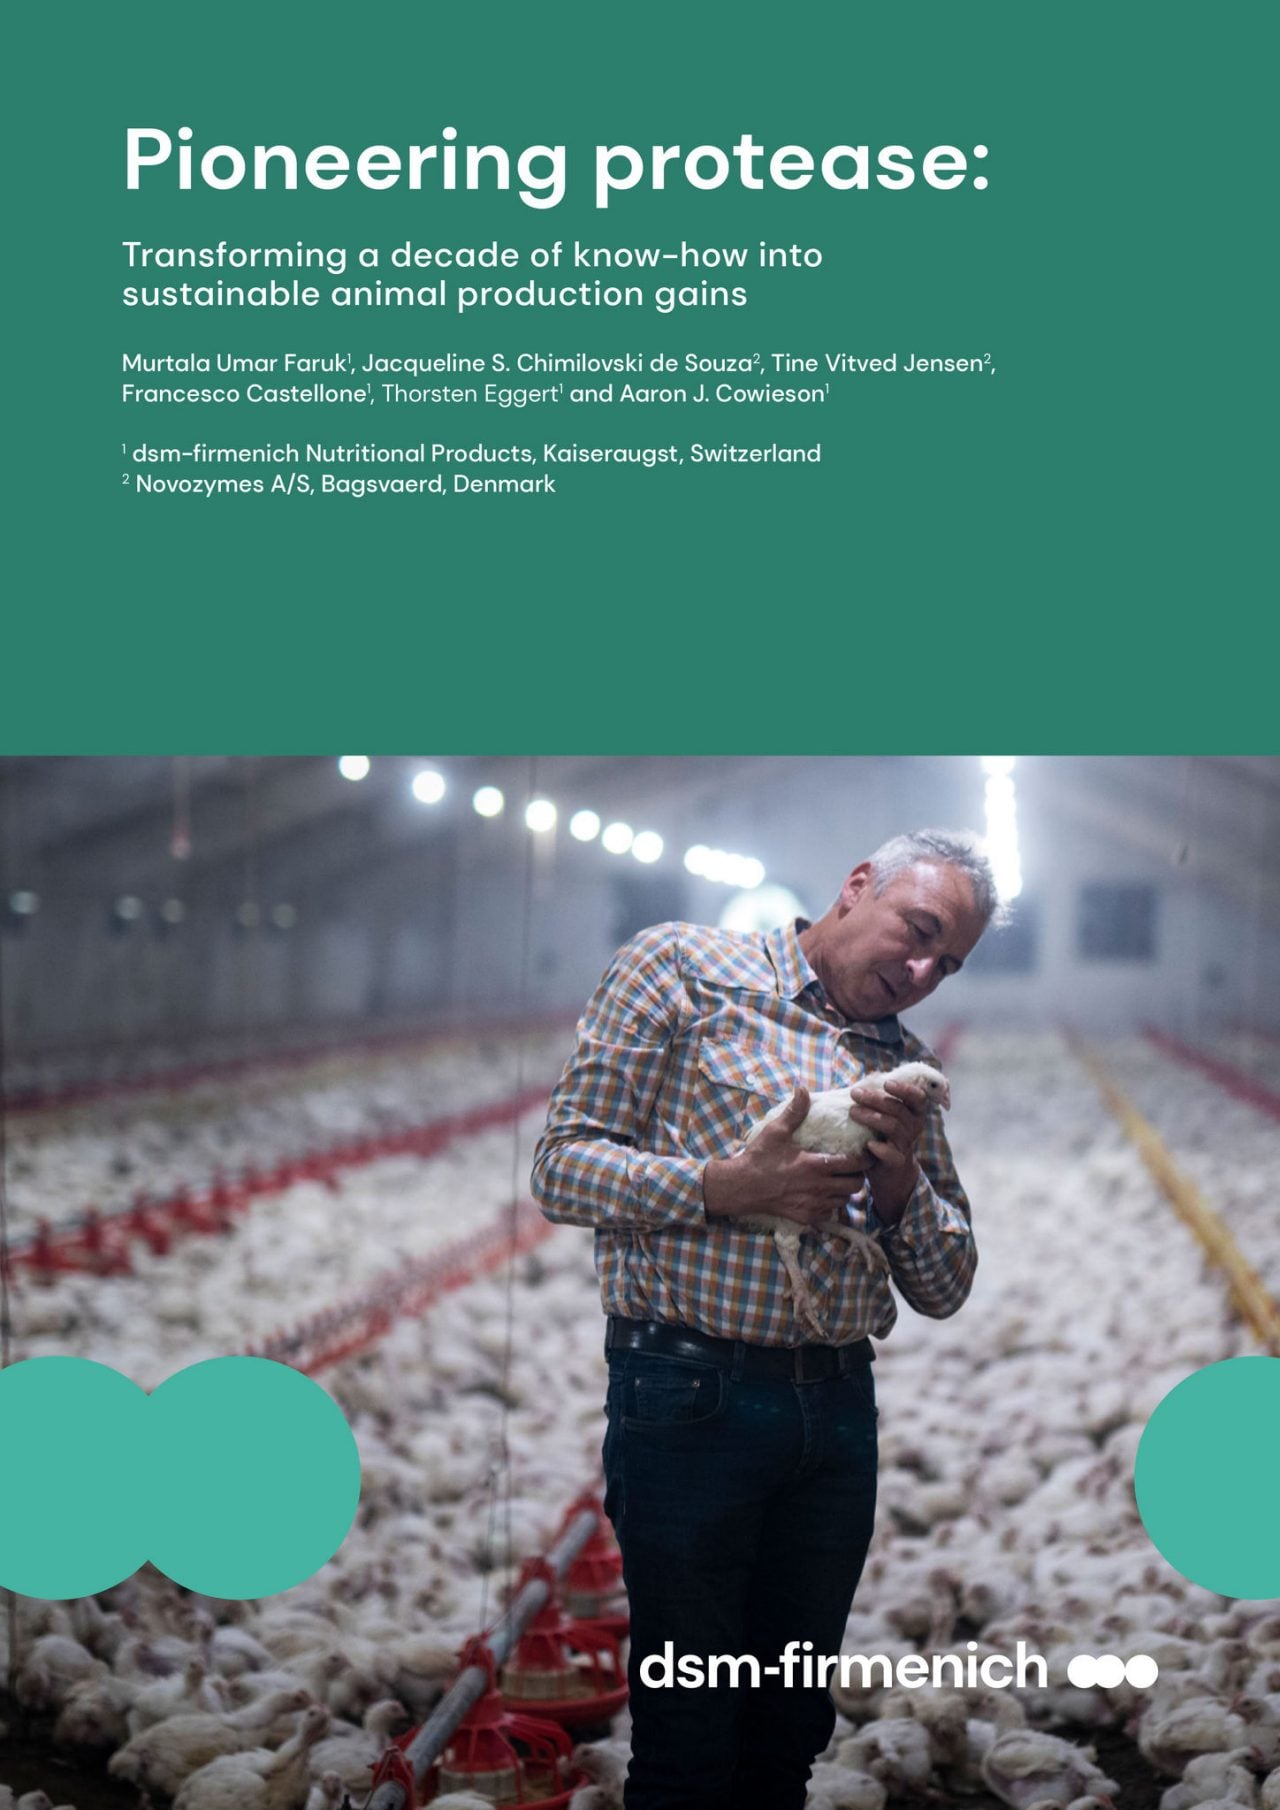 Pioneering protease: transforming a decade of know-how into sustainable animal production gains [white paper]